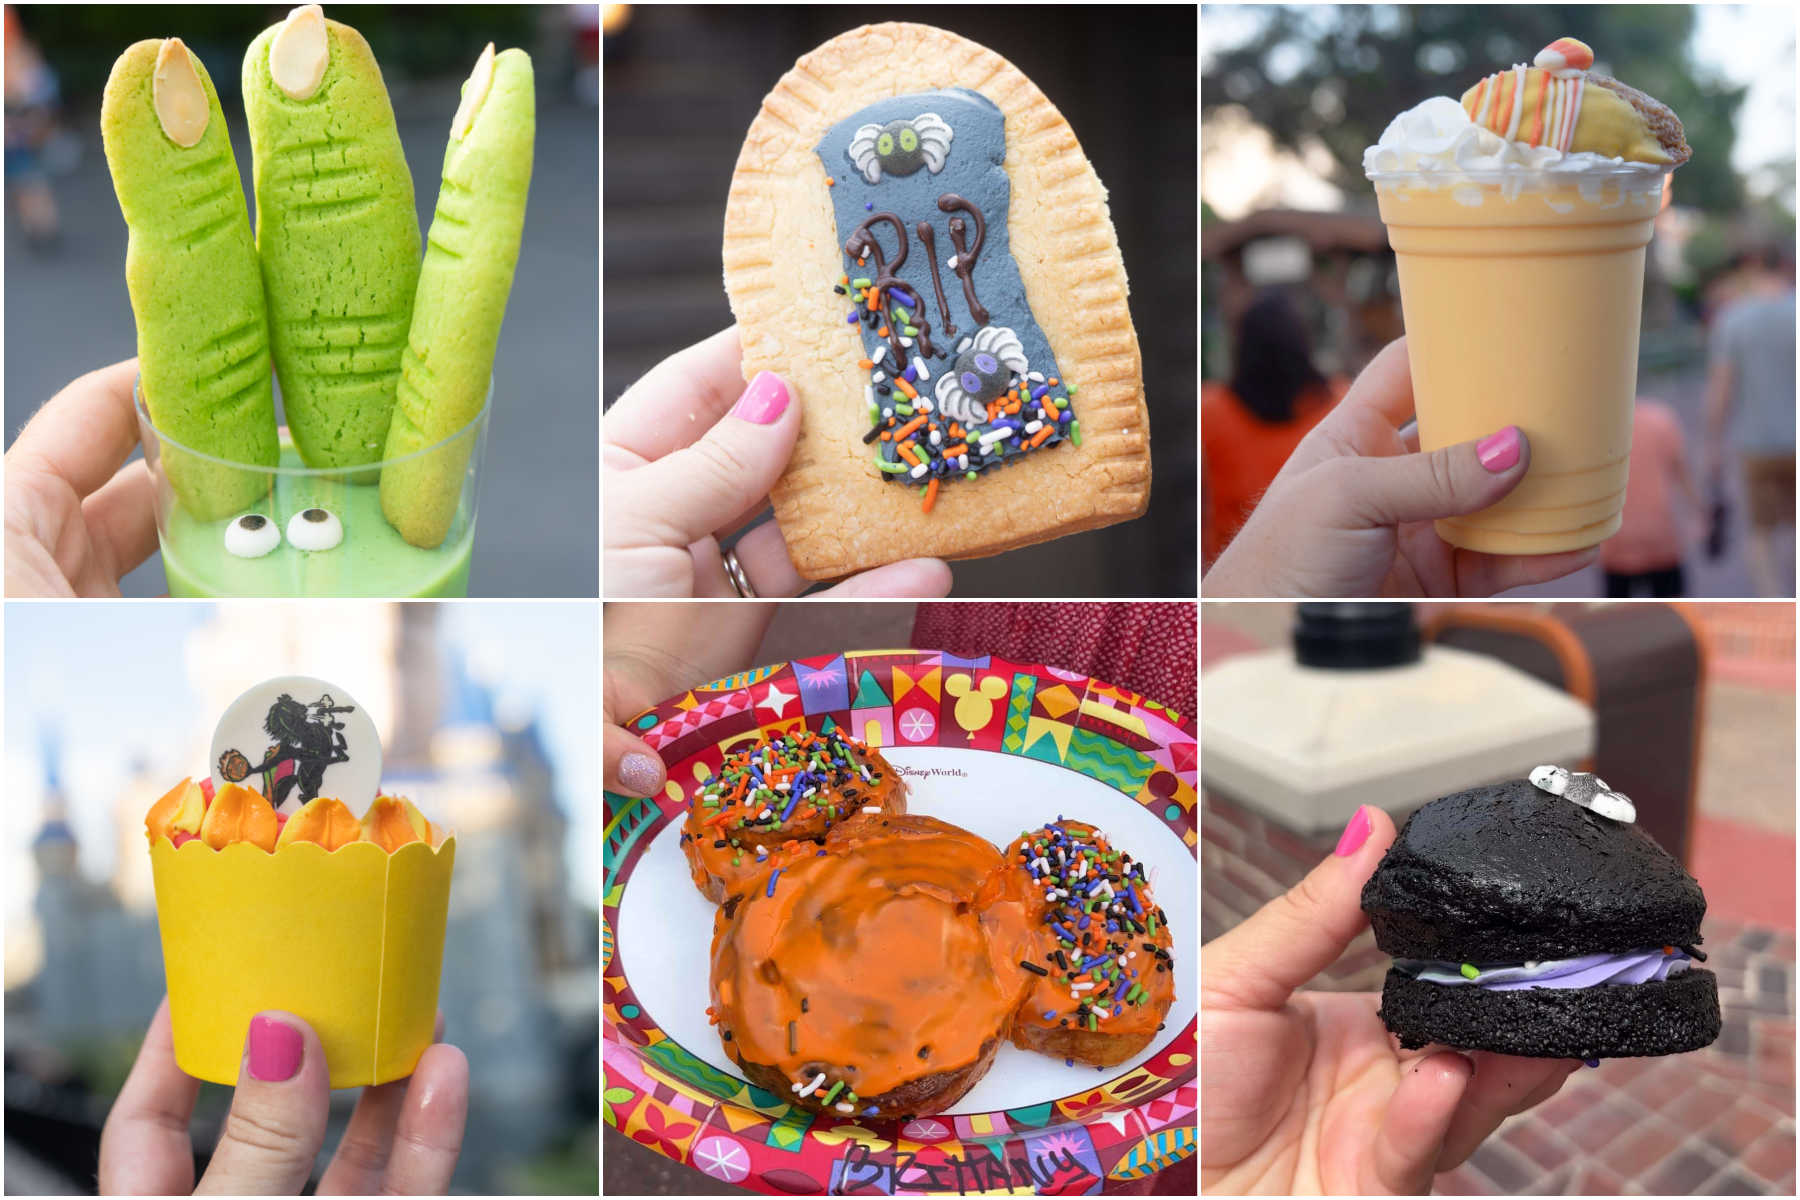 collage of images showing Mickey's Not so scary food items